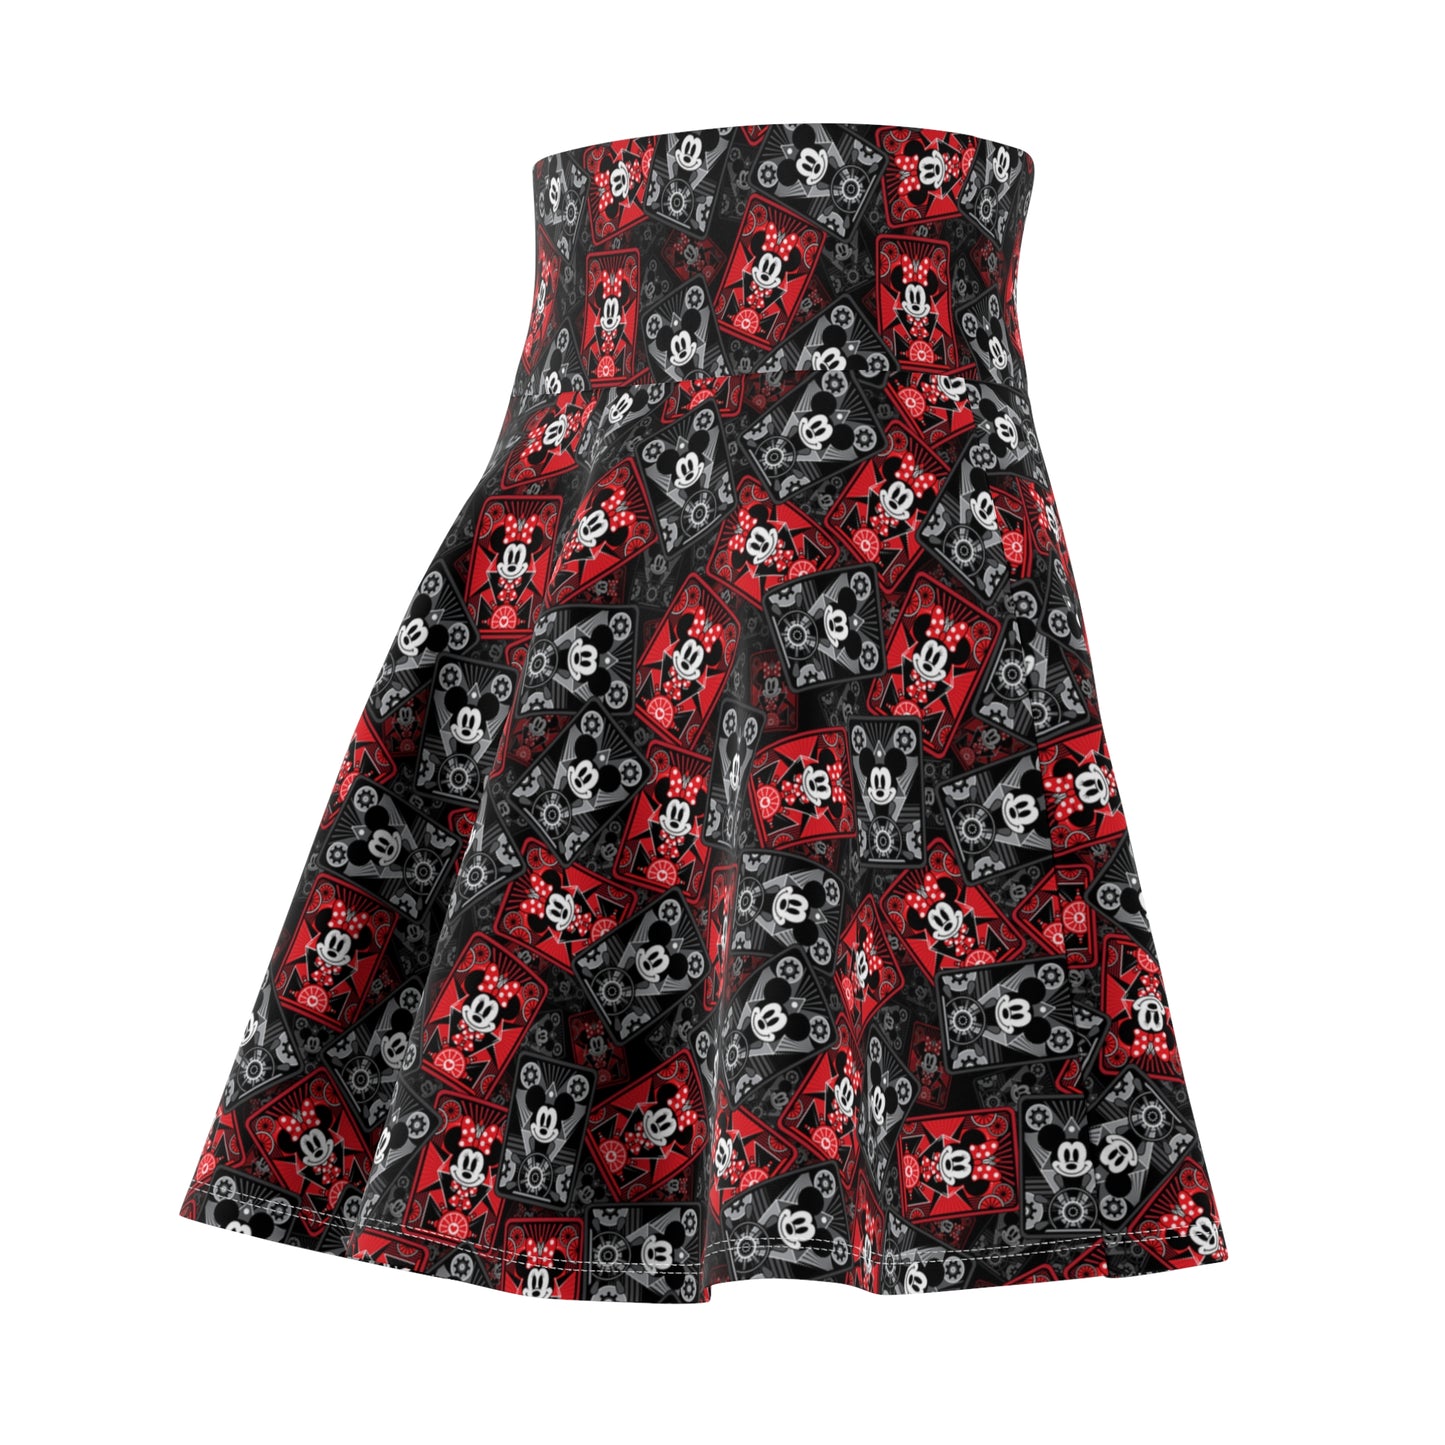 Steamboat Mickey And Minnie Cards Women's Skater Skirt